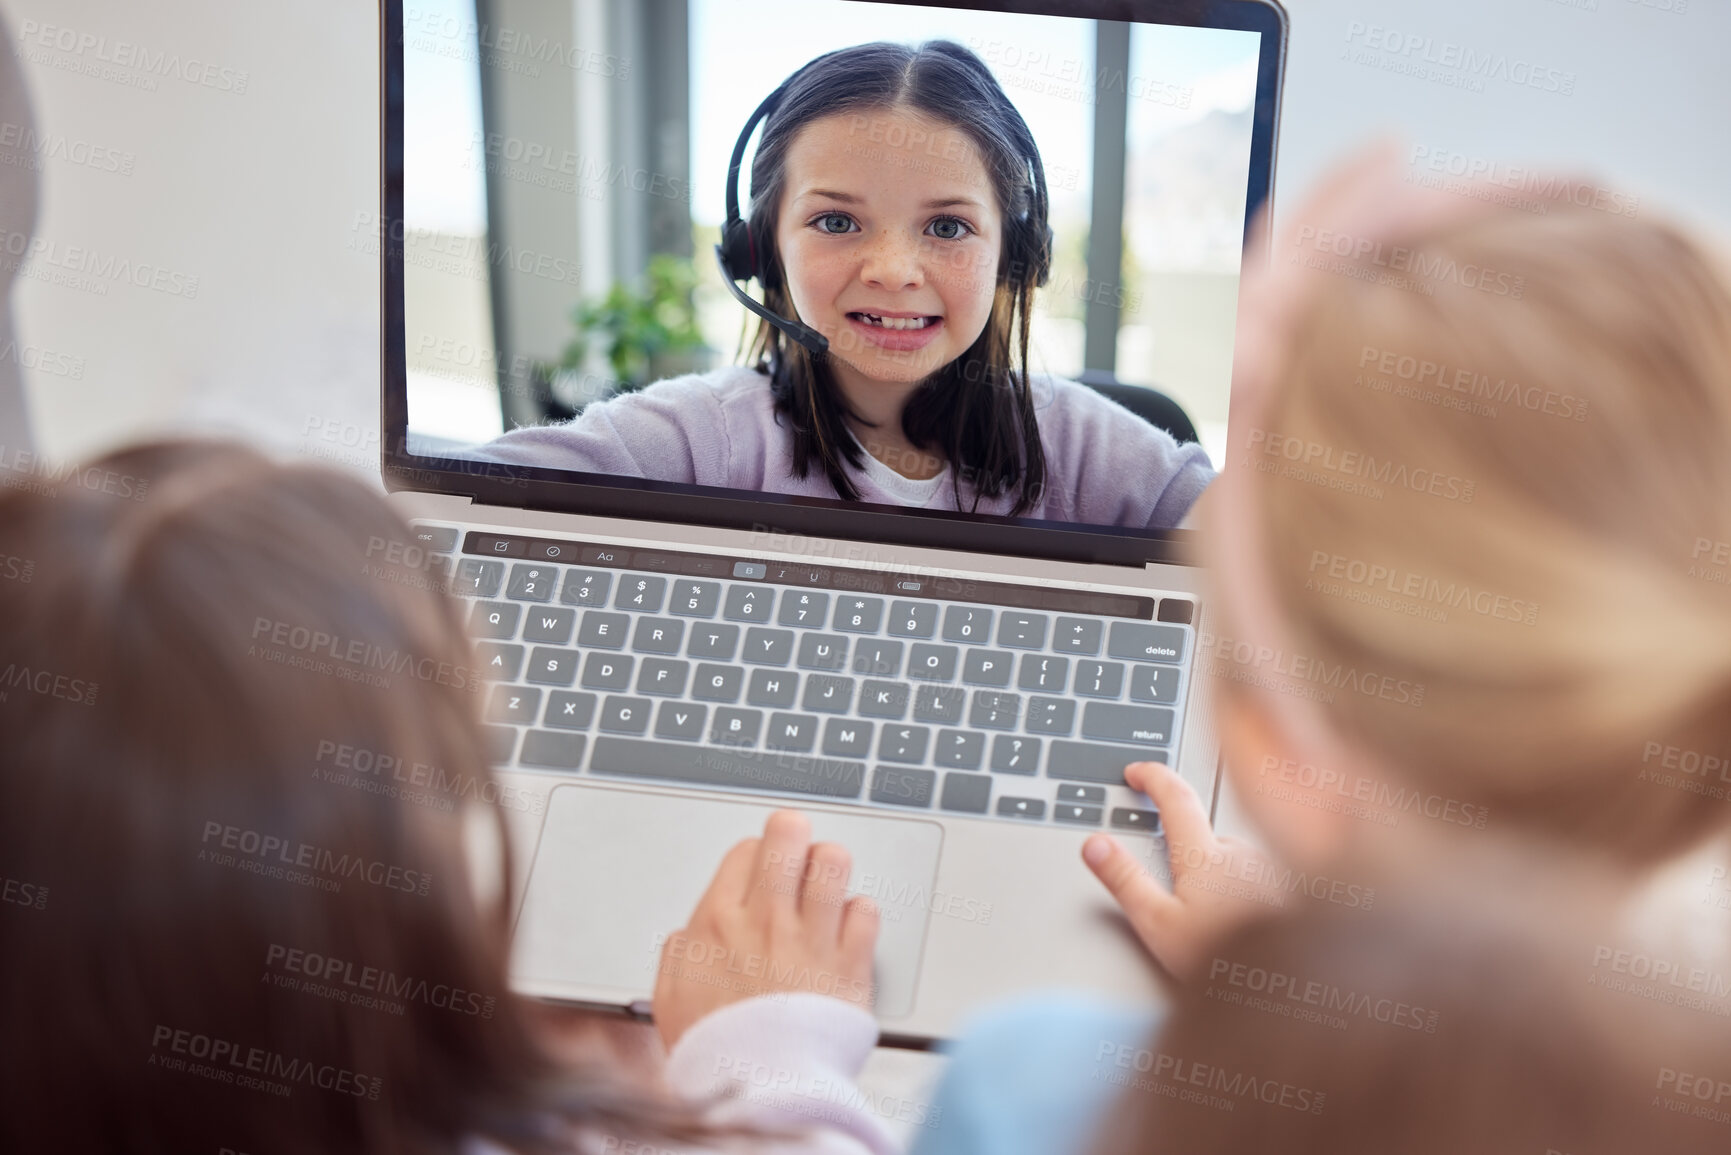 Buy stock photo One happy little caucasian girl wearing headphones while appearing on a laptop screen during a video call with friends or relatives. Happy family connected online and talking via webcam. Cheerful kid playing games and chatting to classmates